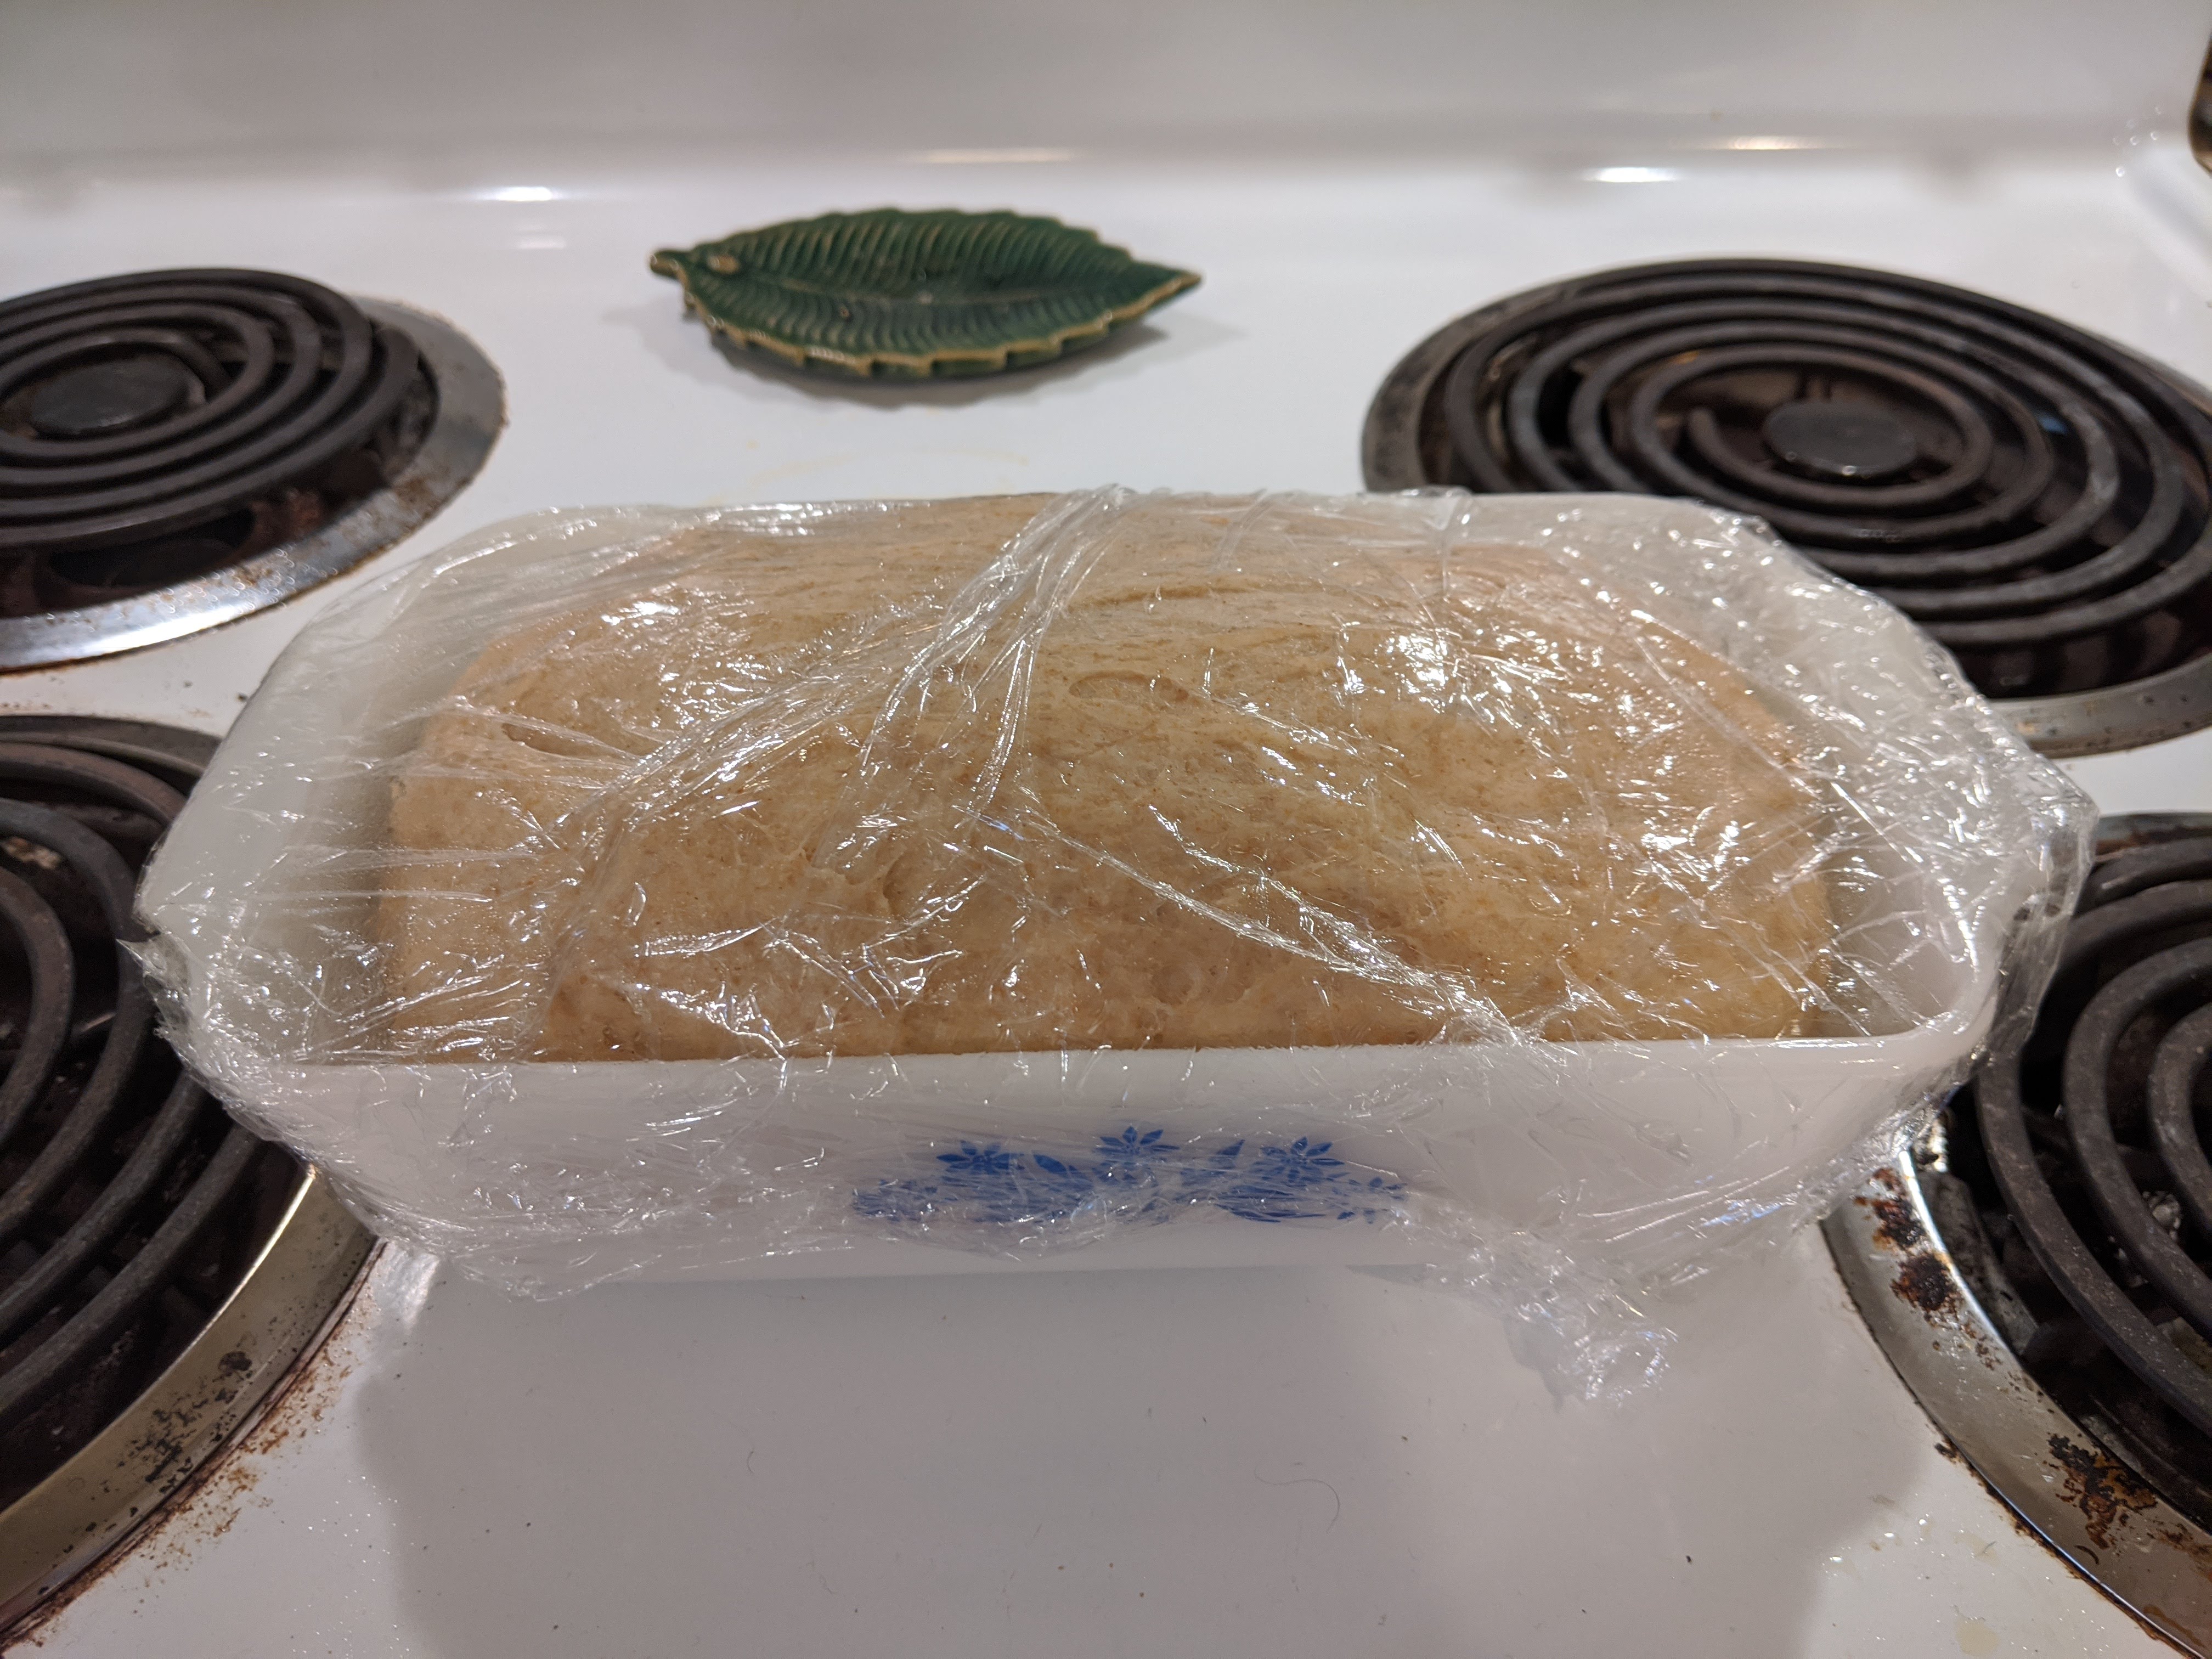 Bread in loaf pan after resting